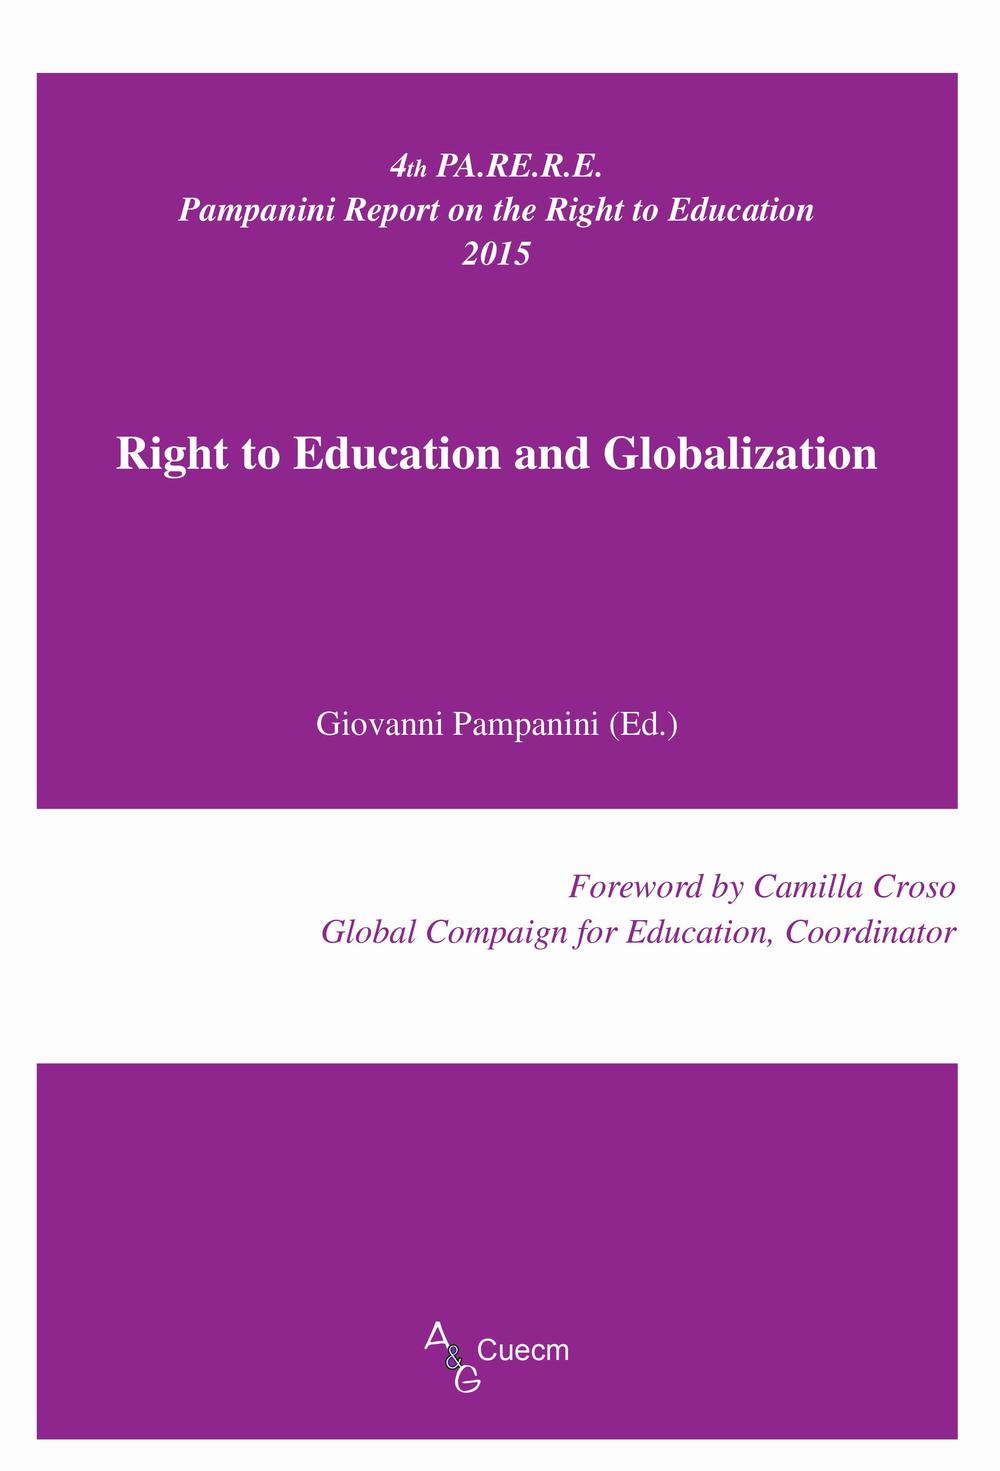 Right to education and globalization